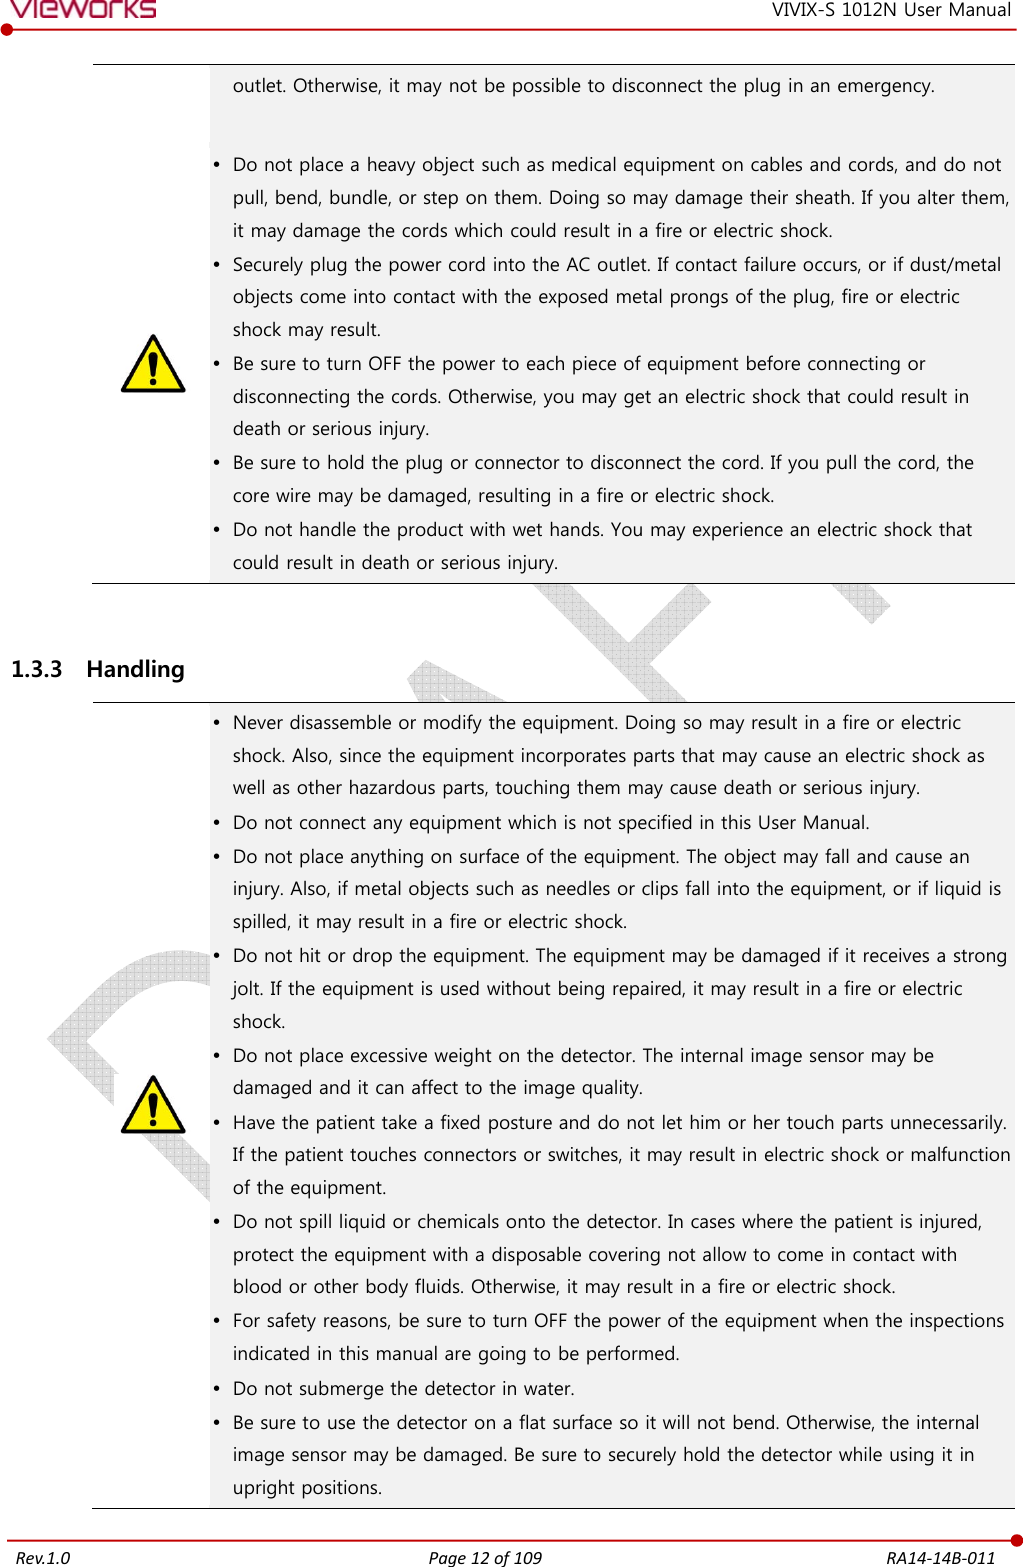   Rev.1.0 Page 12 of 109  RA14-14B-011 VIVIX-S 1012N User Manual outlet. Otherwise, it may not be possible to disconnect the plug in an emergency.   Do not place a heavy object such as medical equipment on cables and cords, and do not pull, bend, bundle, or step on them. Doing so may damage their sheath. If you alter them, it may damage the cords which could result in a fire or electric shock.  Securely plug the power cord into the AC outlet. If contact failure occurs, or if dust/metal objects come into contact with the exposed metal prongs of the plug, fire or electric shock may result.  Be sure to turn OFF the power to each piece of equipment before connecting or disconnecting the cords. Otherwise, you may get an electric shock that could result in death or serious injury.  Be sure to hold the plug or connector to disconnect the cord. If you pull the cord, the core wire may be damaged, resulting in a fire or electric shock.  Do not handle the product with wet hands. You may experience an electric shock that could result in death or serious injury.  1.3.3 Handling   Never disassemble or modify the equipment. Doing so may result in a fire or electric shock. Also, since the equipment incorporates parts that may cause an electric shock as well as other hazardous parts, touching them may cause death or serious injury.  Do not connect any equipment which is not specified in this User Manual.  Do not place anything on surface of the equipment. The object may fall and cause an injury. Also, if metal objects such as needles or clips fall into the equipment, or if liquid is spilled, it may result in a fire or electric shock.  Do not hit or drop the equipment. The equipment may be damaged if it receives a strong jolt. If the equipment is used without being repaired, it may result in a fire or electric shock.  Do not place excessive weight on the detector. The internal image sensor may be damaged and it can affect to the image quality.  Have the patient take a fixed posture and do not let him or her touch parts unnecessarily. If the patient touches connectors or switches, it may result in electric shock or malfunction of the equipment.  Do not spill liquid or chemicals onto the detector. In cases where the patient is injured, protect the equipment with a disposable covering not allow to come in contact with blood or other body fluids. Otherwise, it may result in a fire or electric shock.  For safety reasons, be sure to turn OFF the power of the equipment when the inspections indicated in this manual are going to be performed.  Do not submerge the detector in water.  Be sure to use the detector on a flat surface so it will not bend. Otherwise, the internal image sensor may be damaged. Be sure to securely hold the detector while using it in upright positions. 